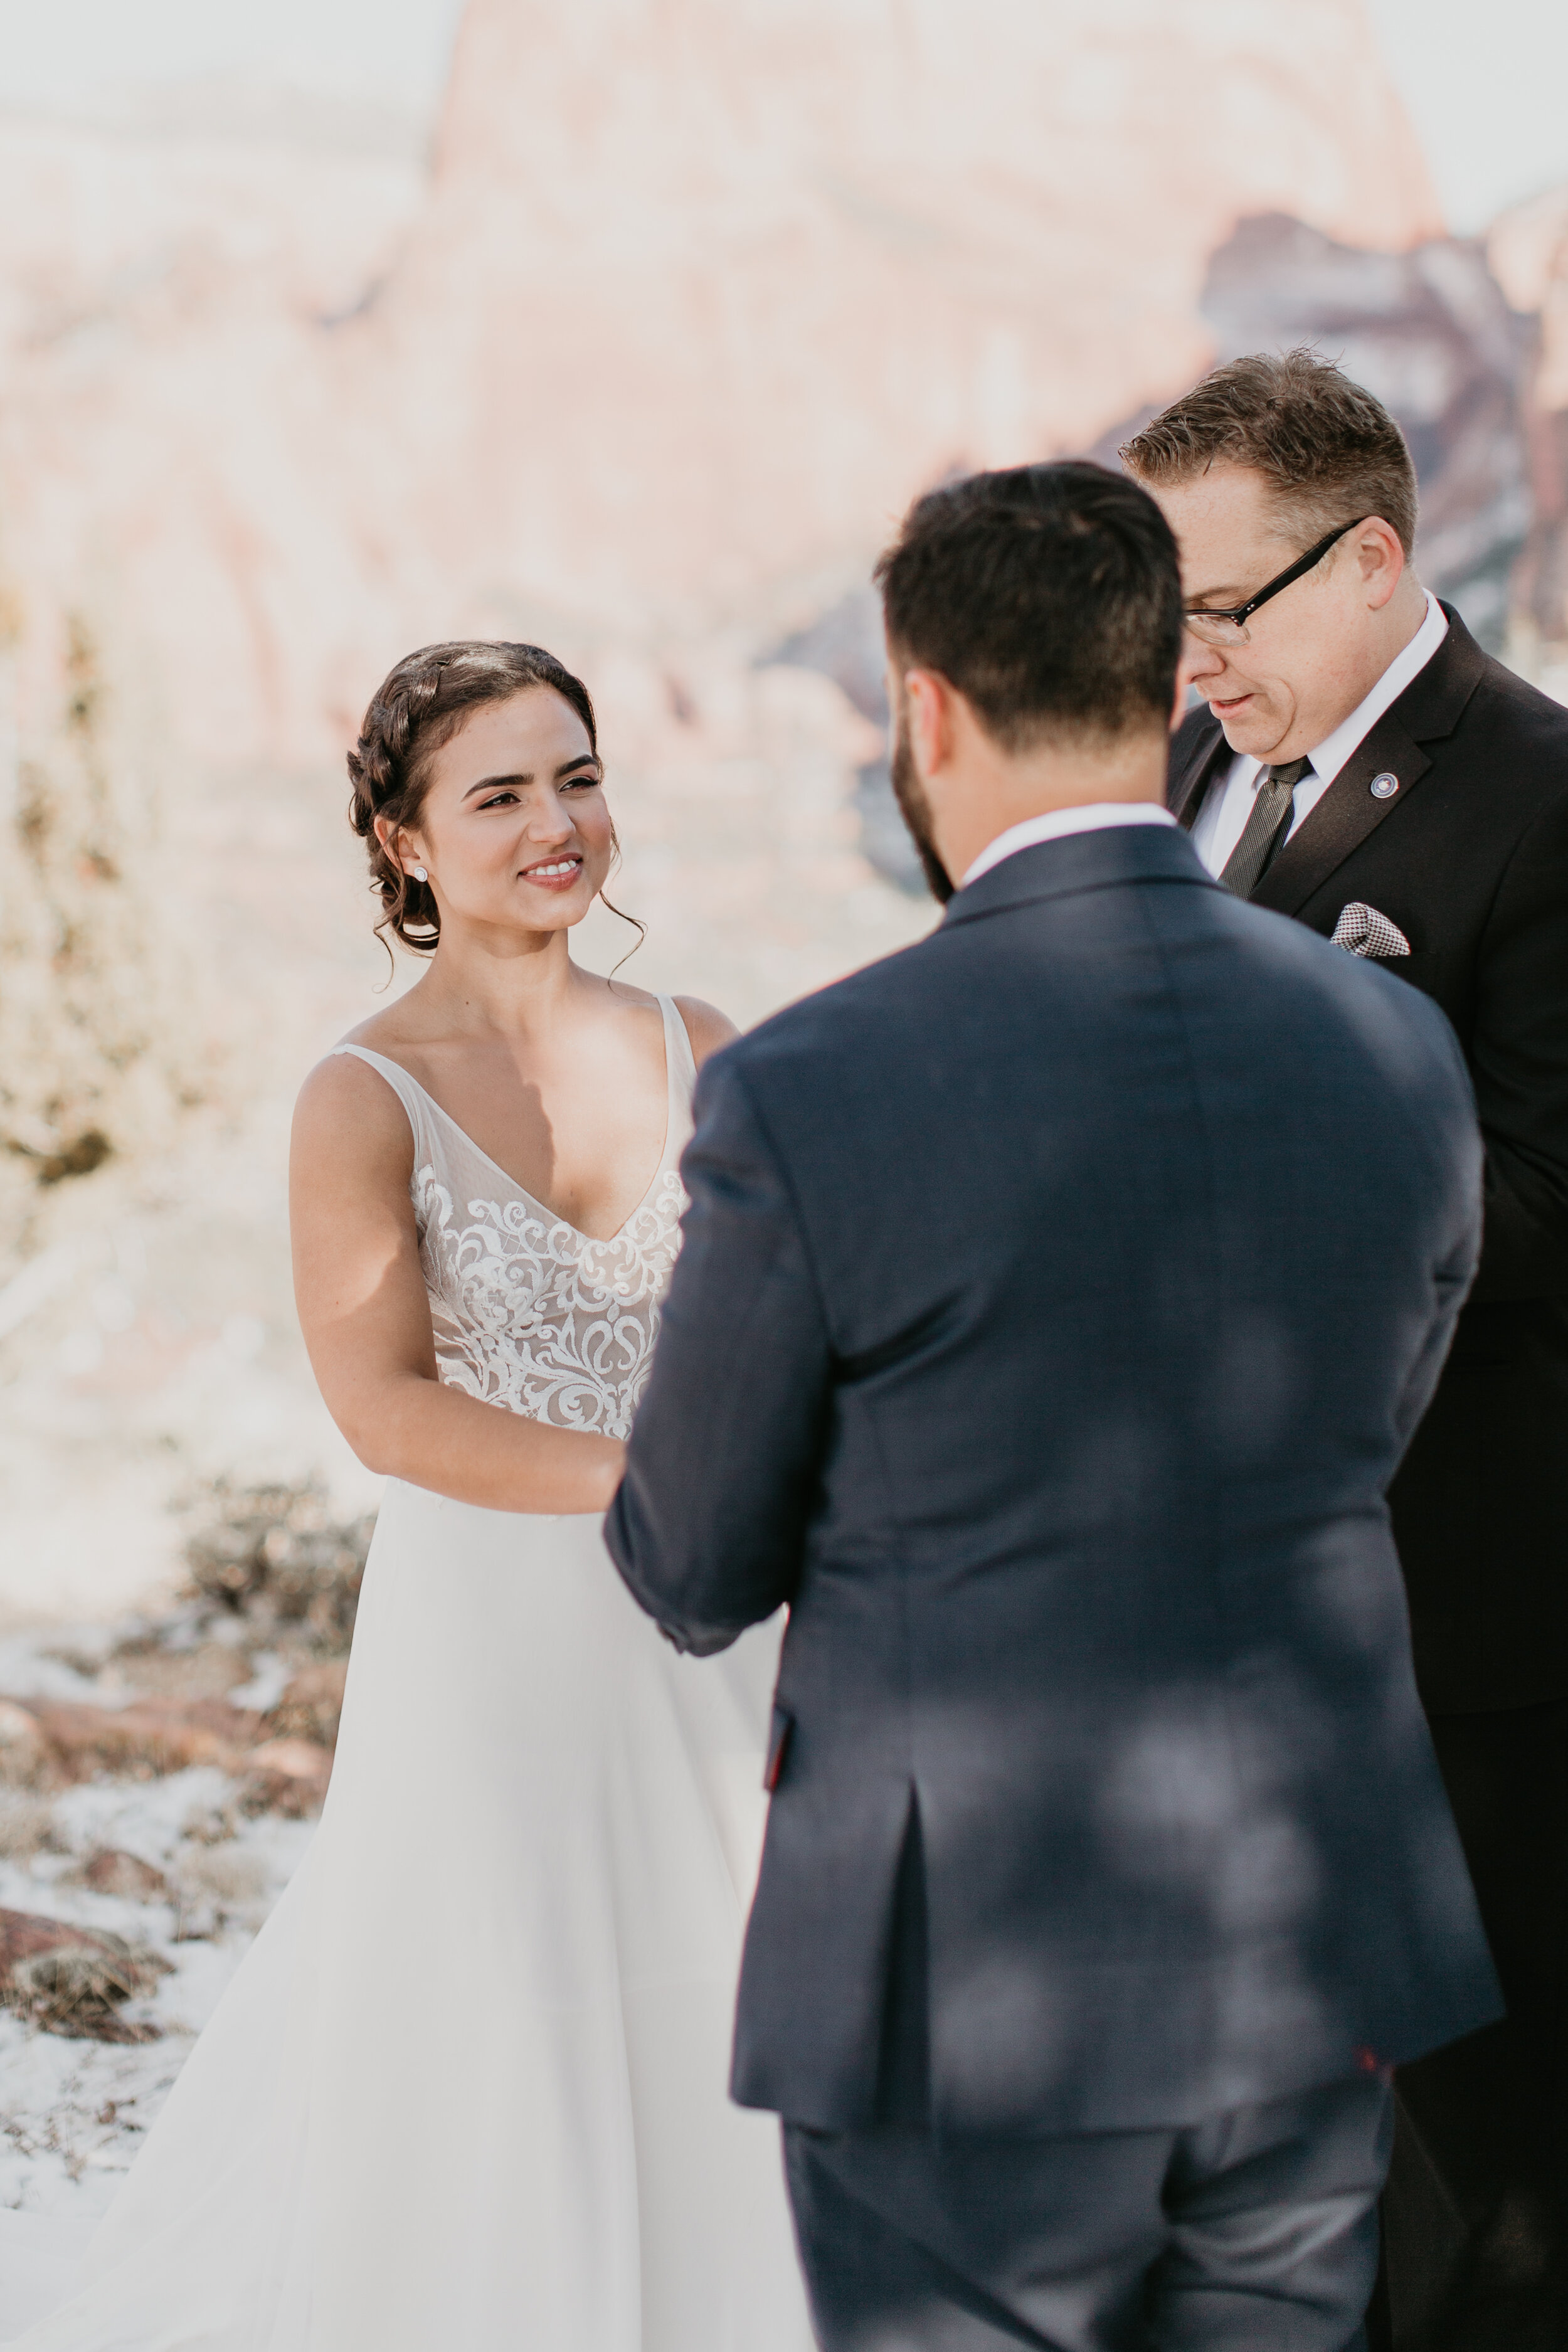 Nicole-Daacke-Photography-snowy-hiking-elopement-in-zion-national-park-zion-elopement-photographer-canyon-overlook-trial-brial-portraits-in-mt-zion-national-park-utah-desert-adventure-elopement-photographer-111.jpg